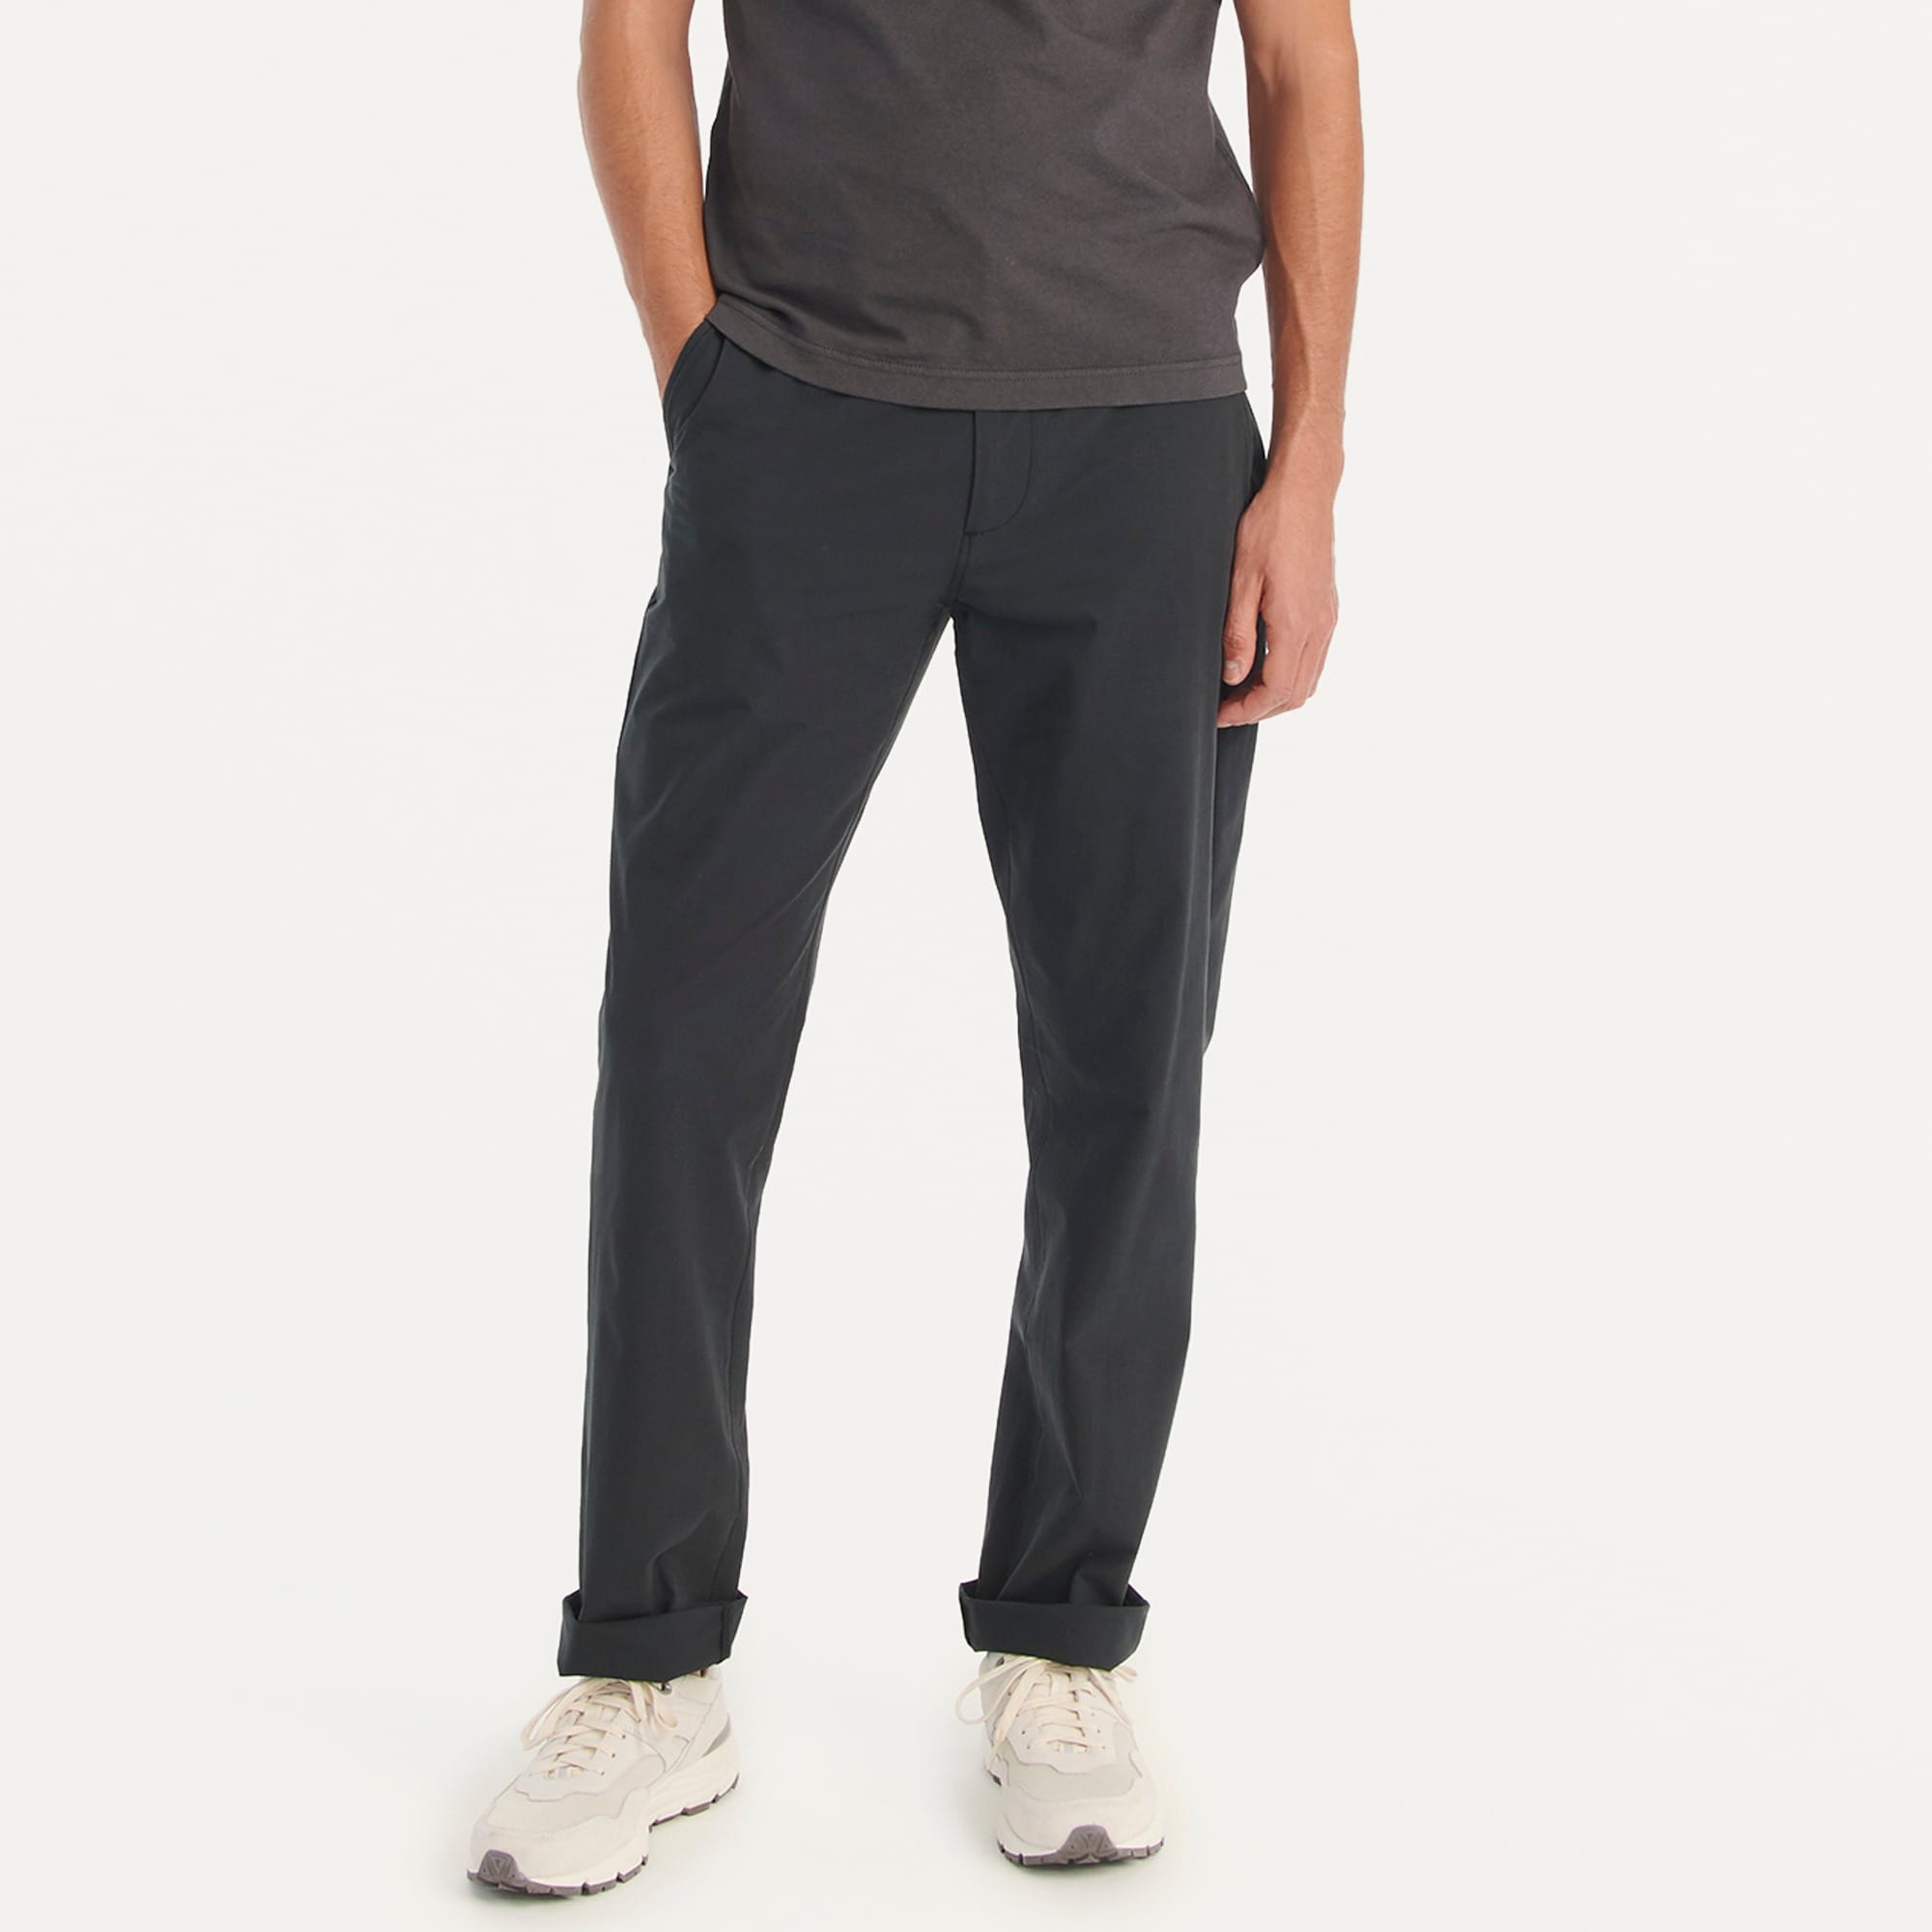  1040 Athletic tapered-fit tech pant